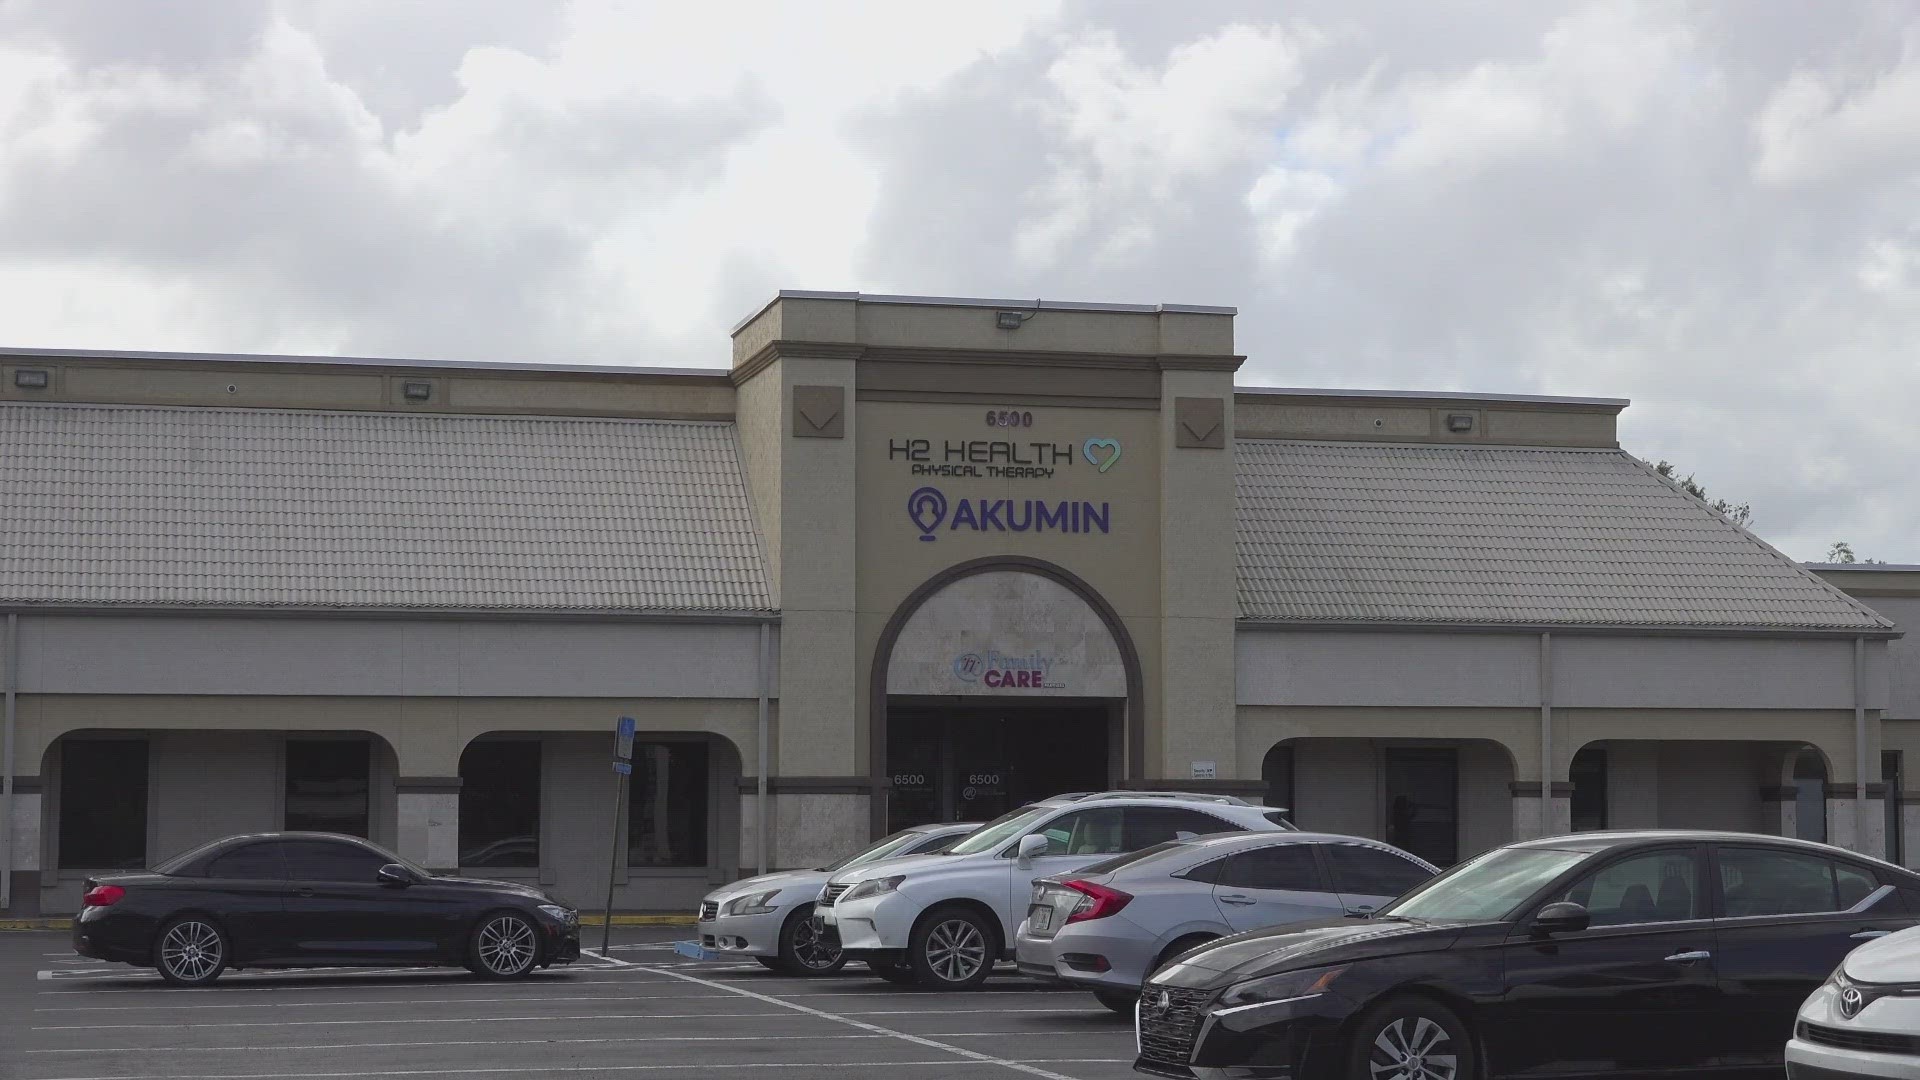 There are three Akumin Imaging centers in Jacksonville: Roosevelt Boulevard, Dunn Avenue, and Fort Caroline Road.